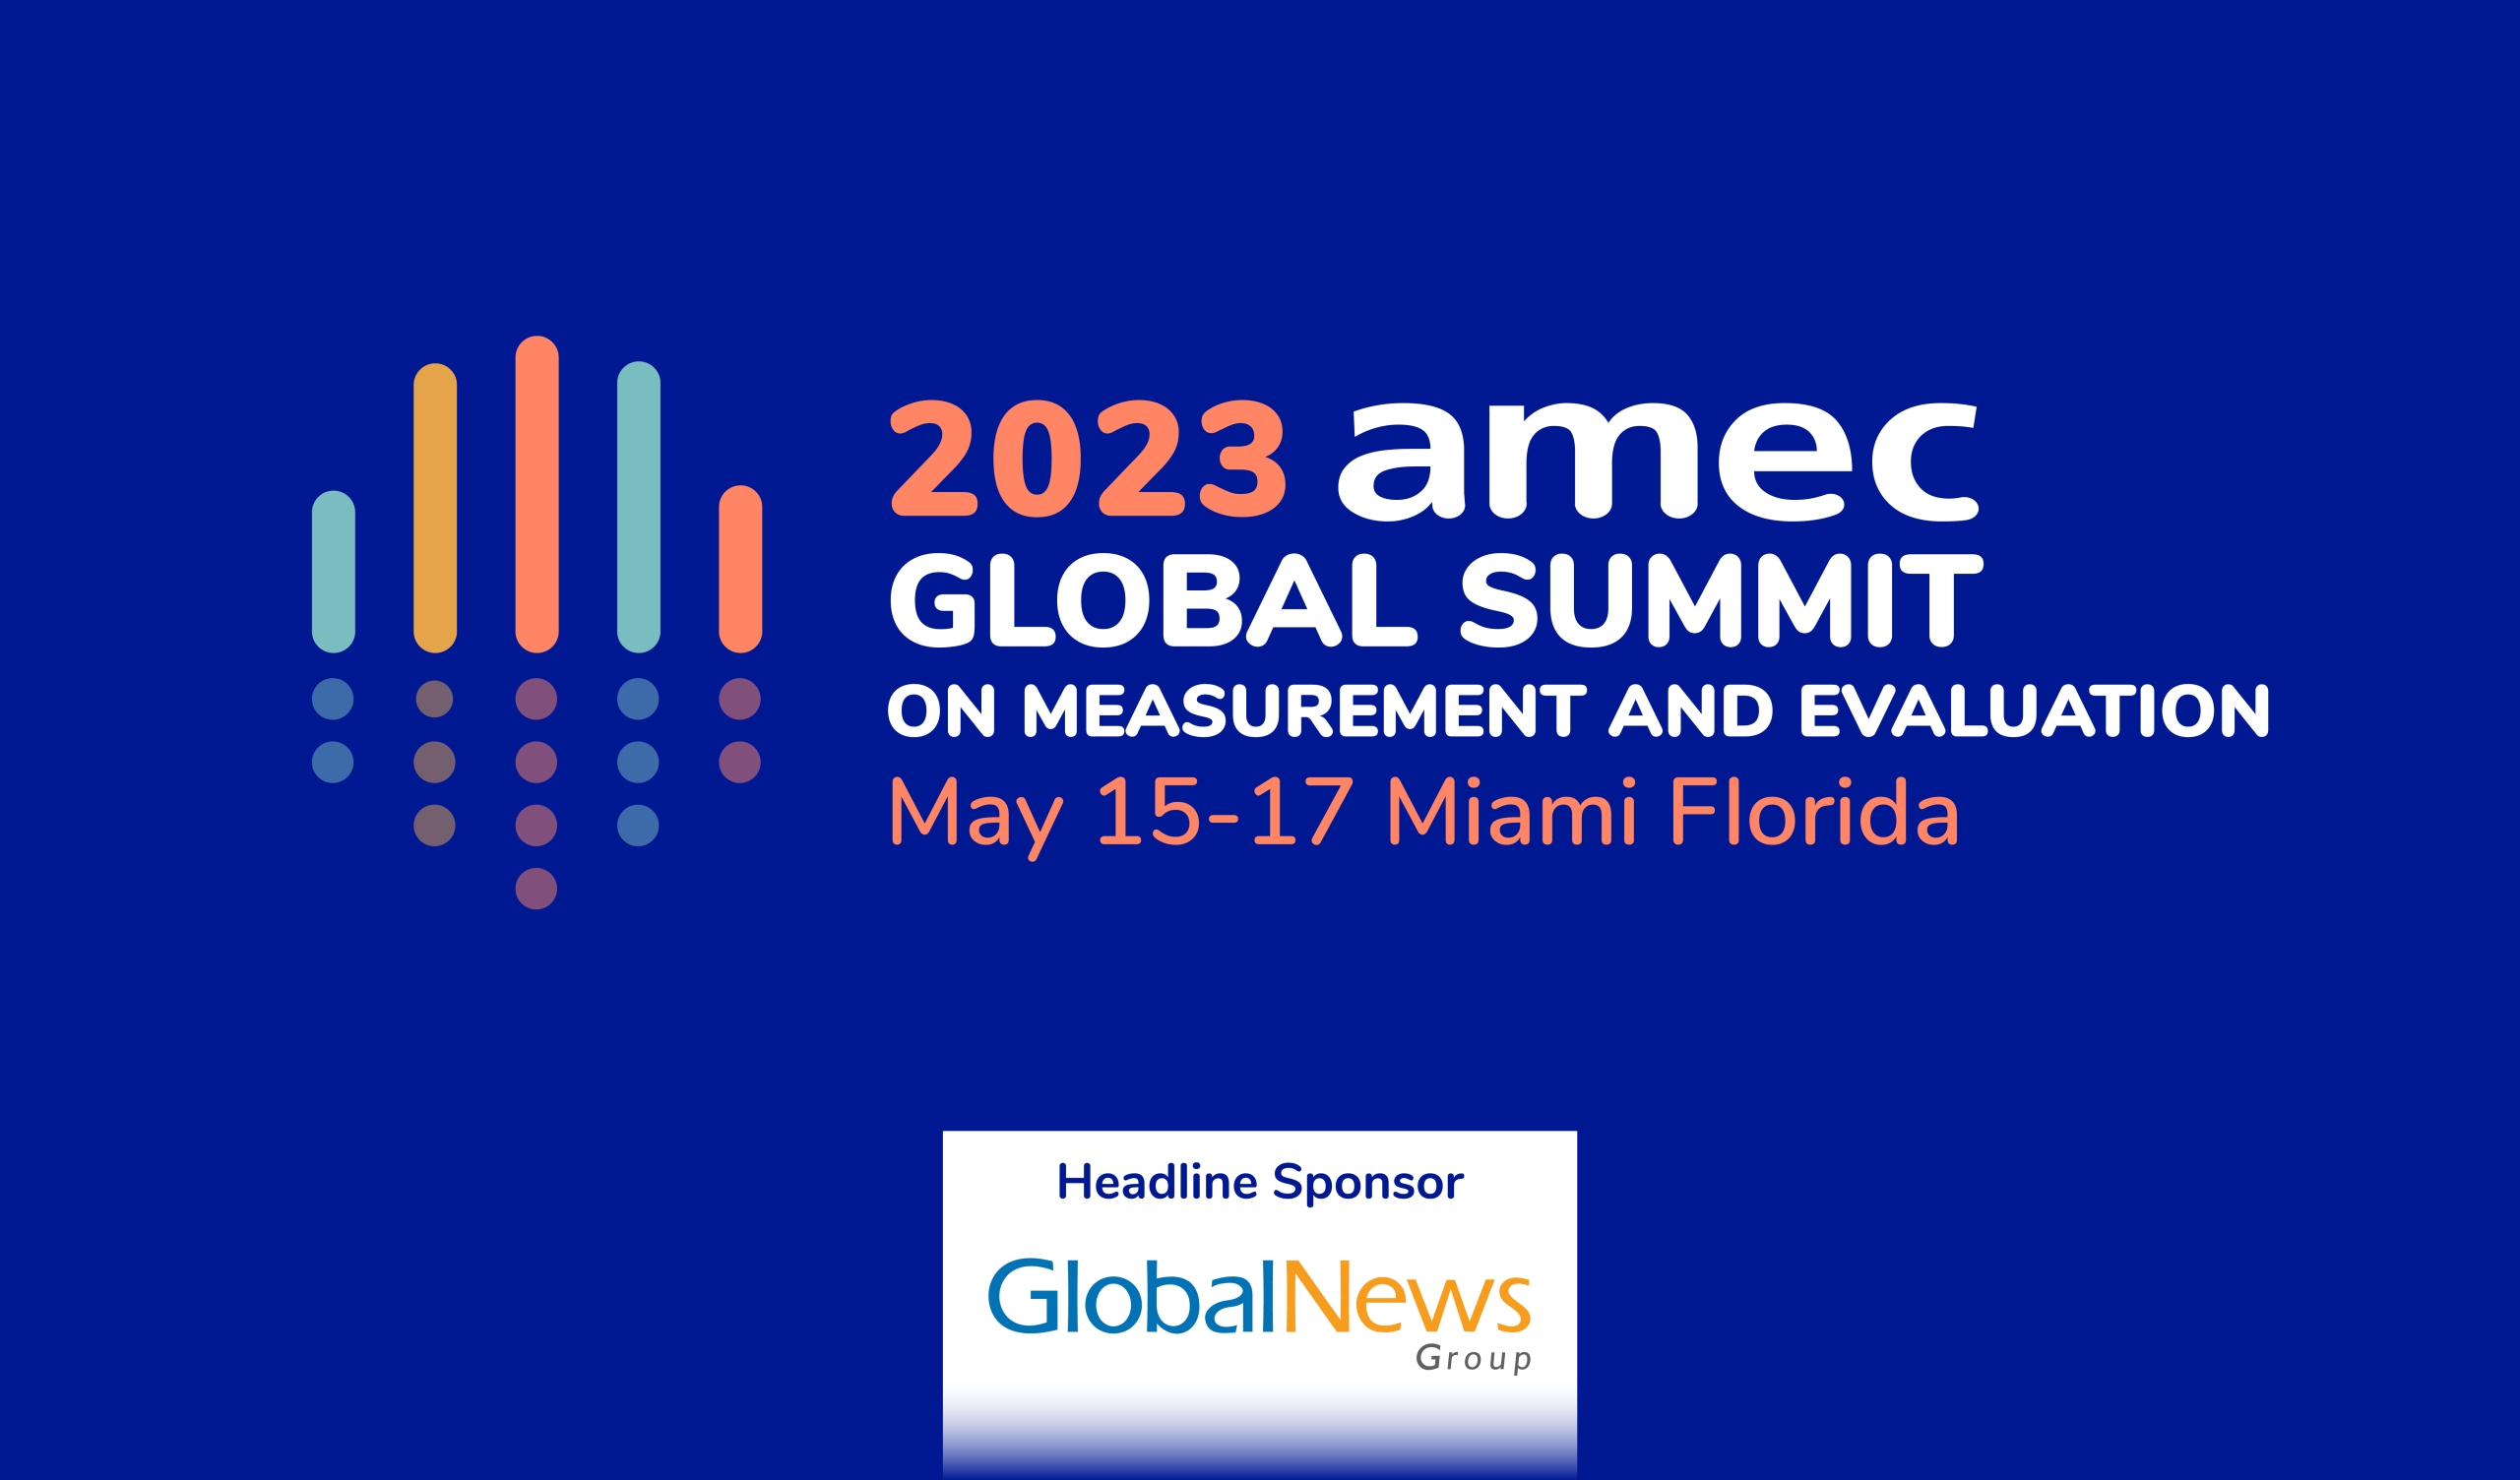 2023 AMEC Global Summit on Measurement and Evaluation - Save the Date